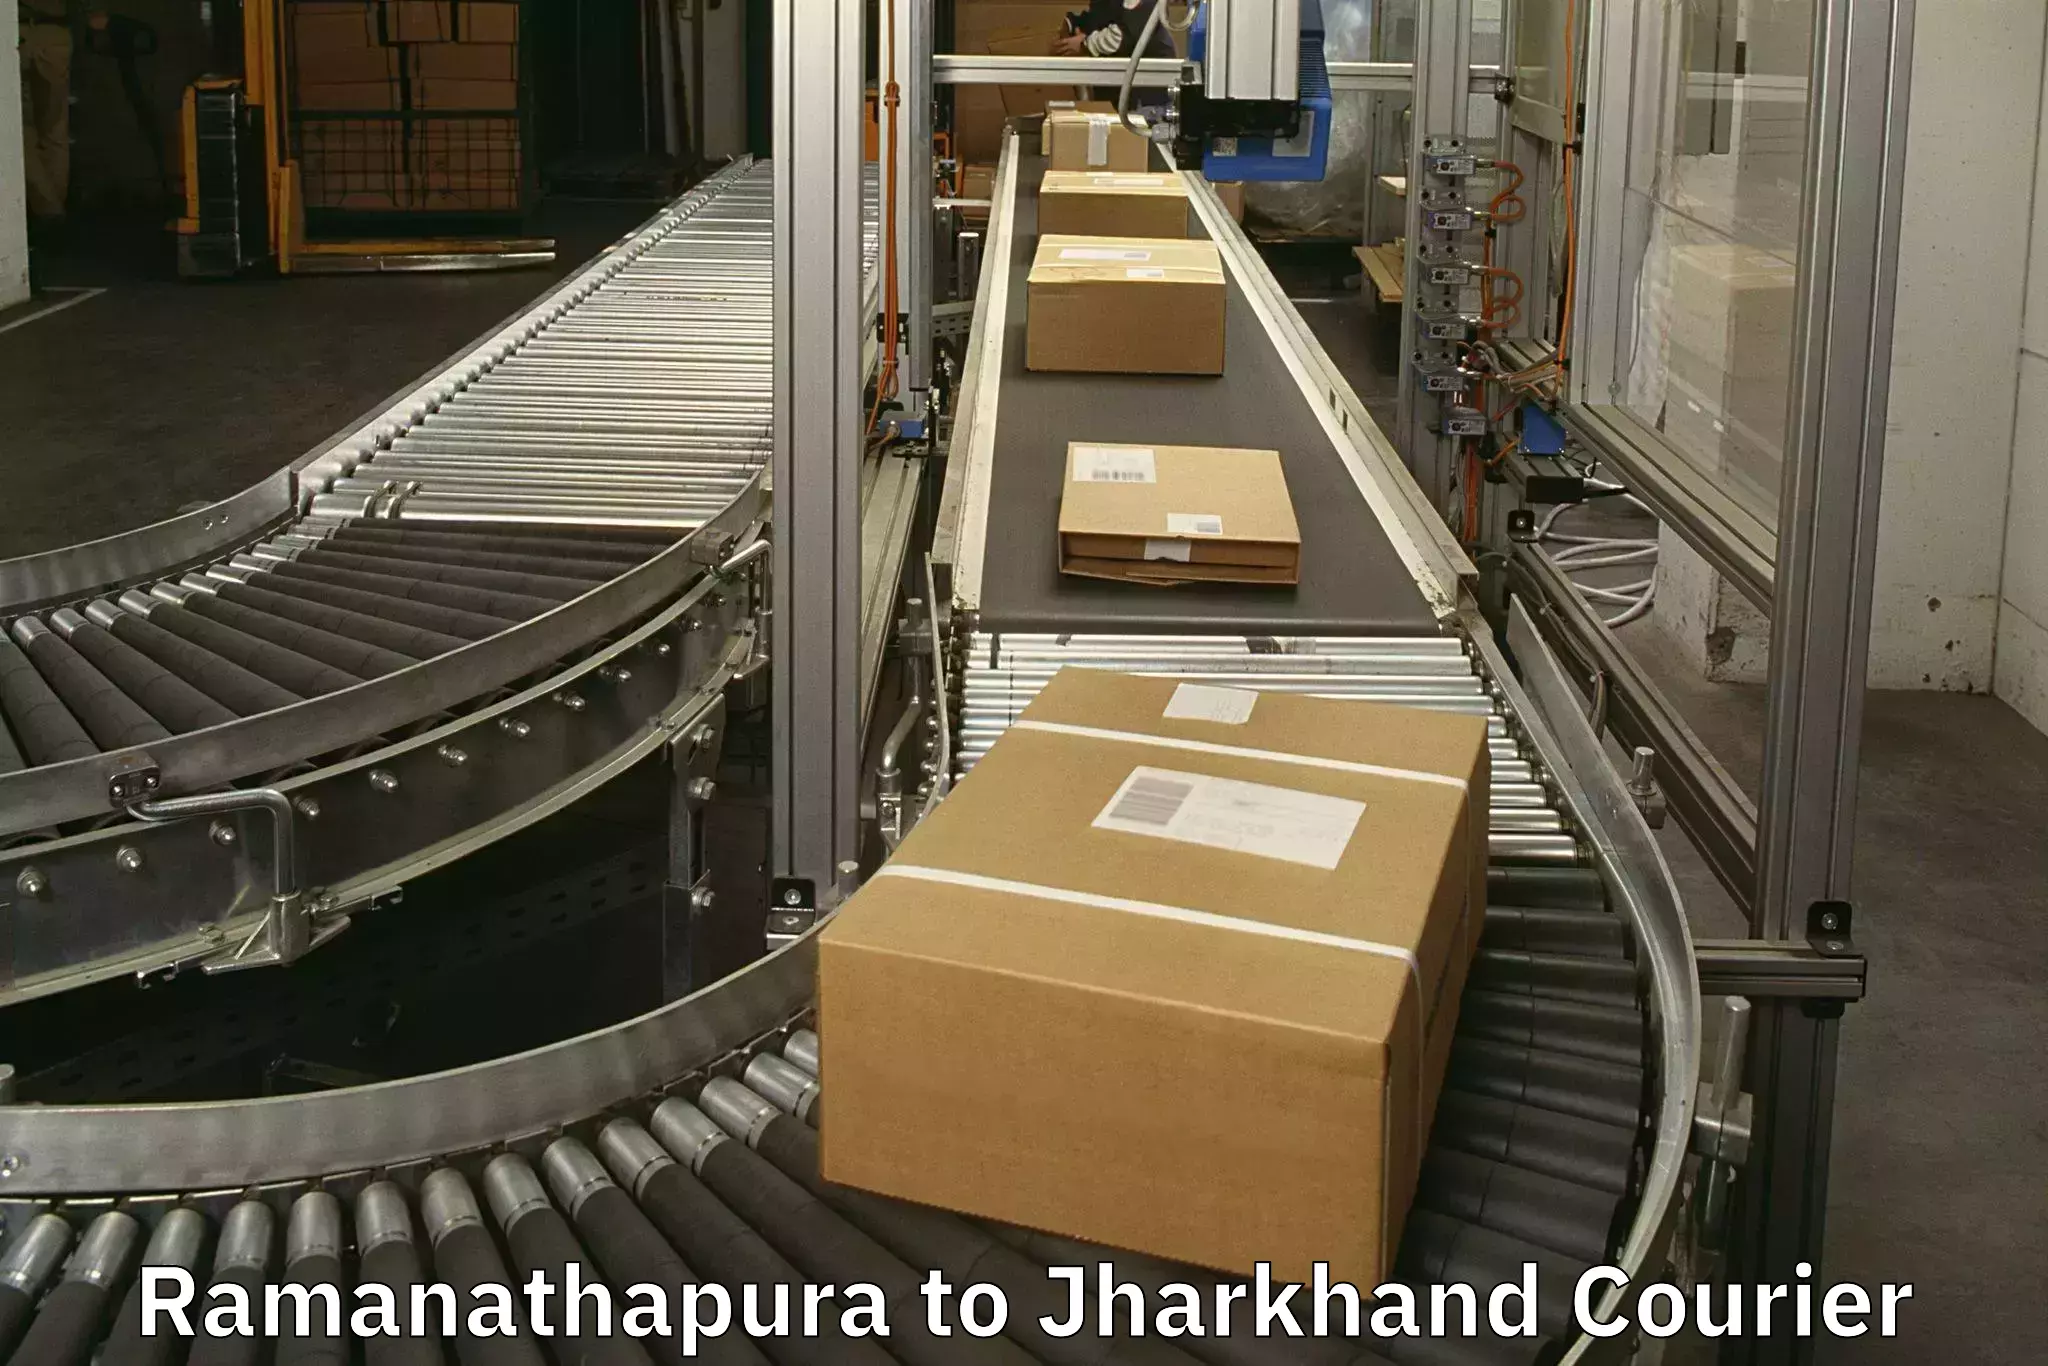 Luggage delivery system Ramanathapura to Jamshedpur